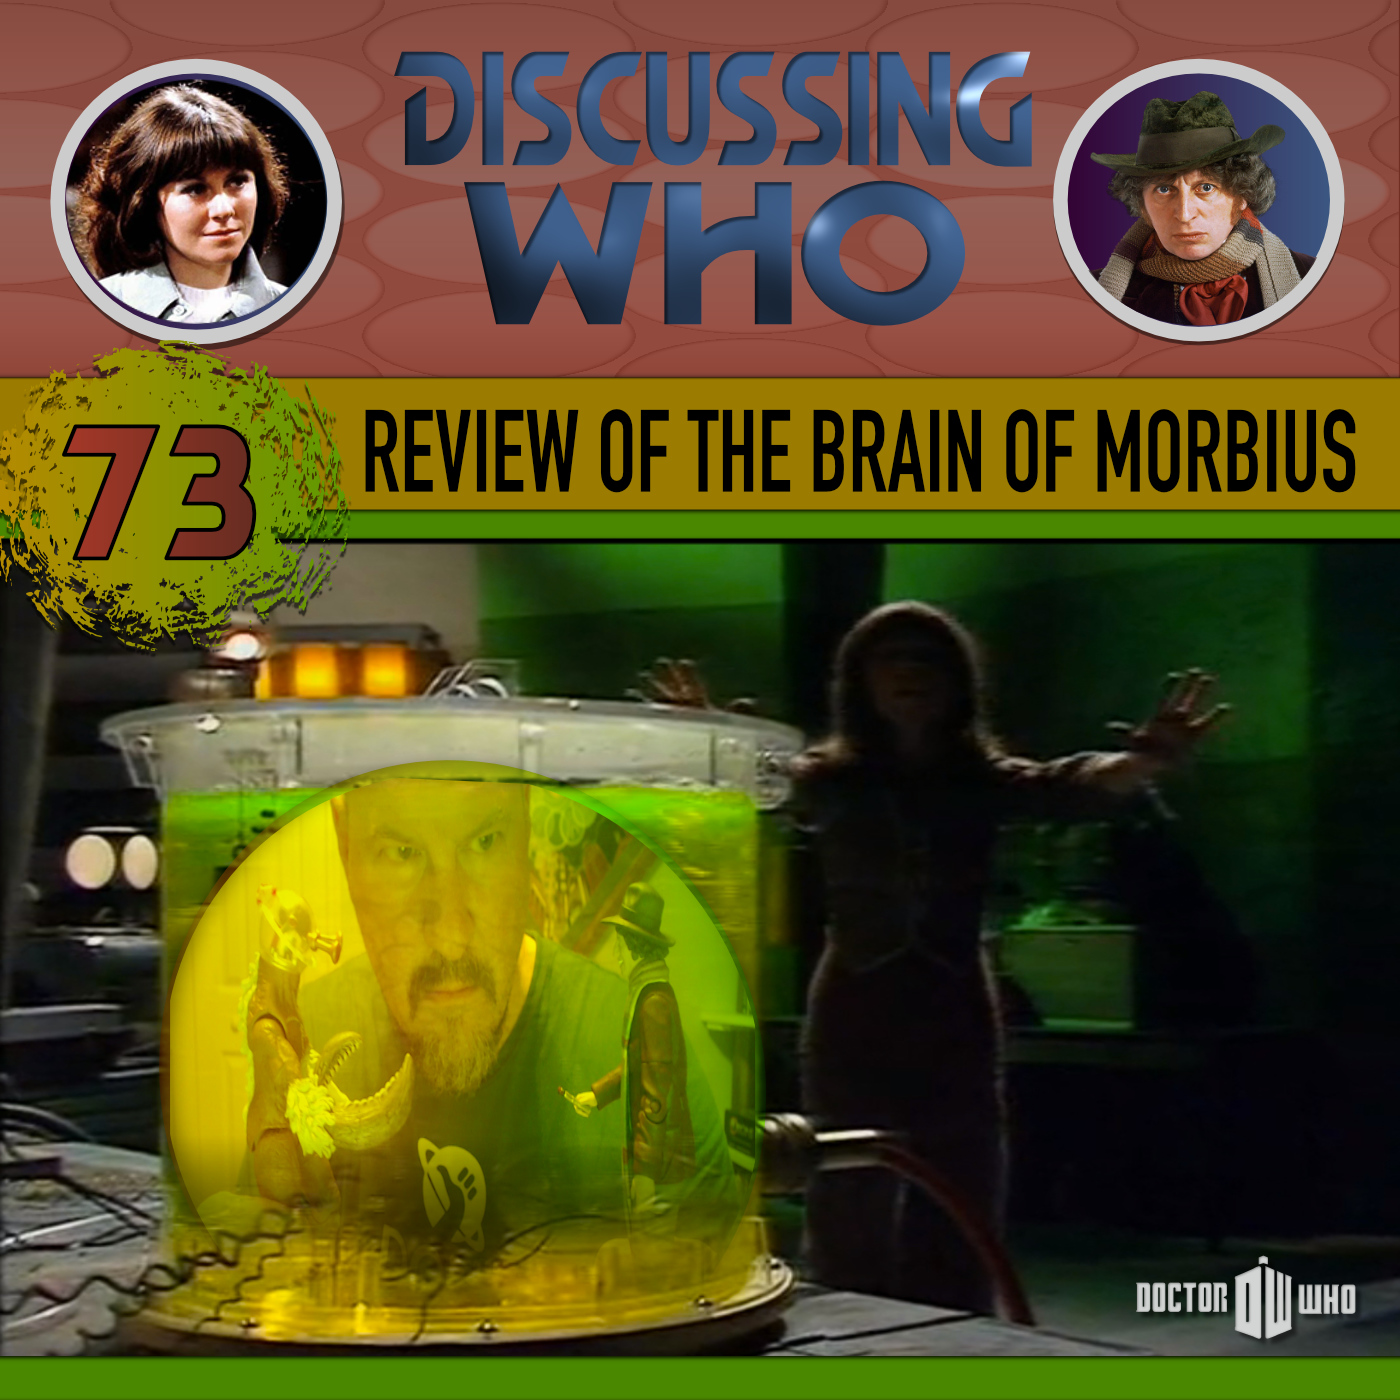 Review of the Brain of Morbius